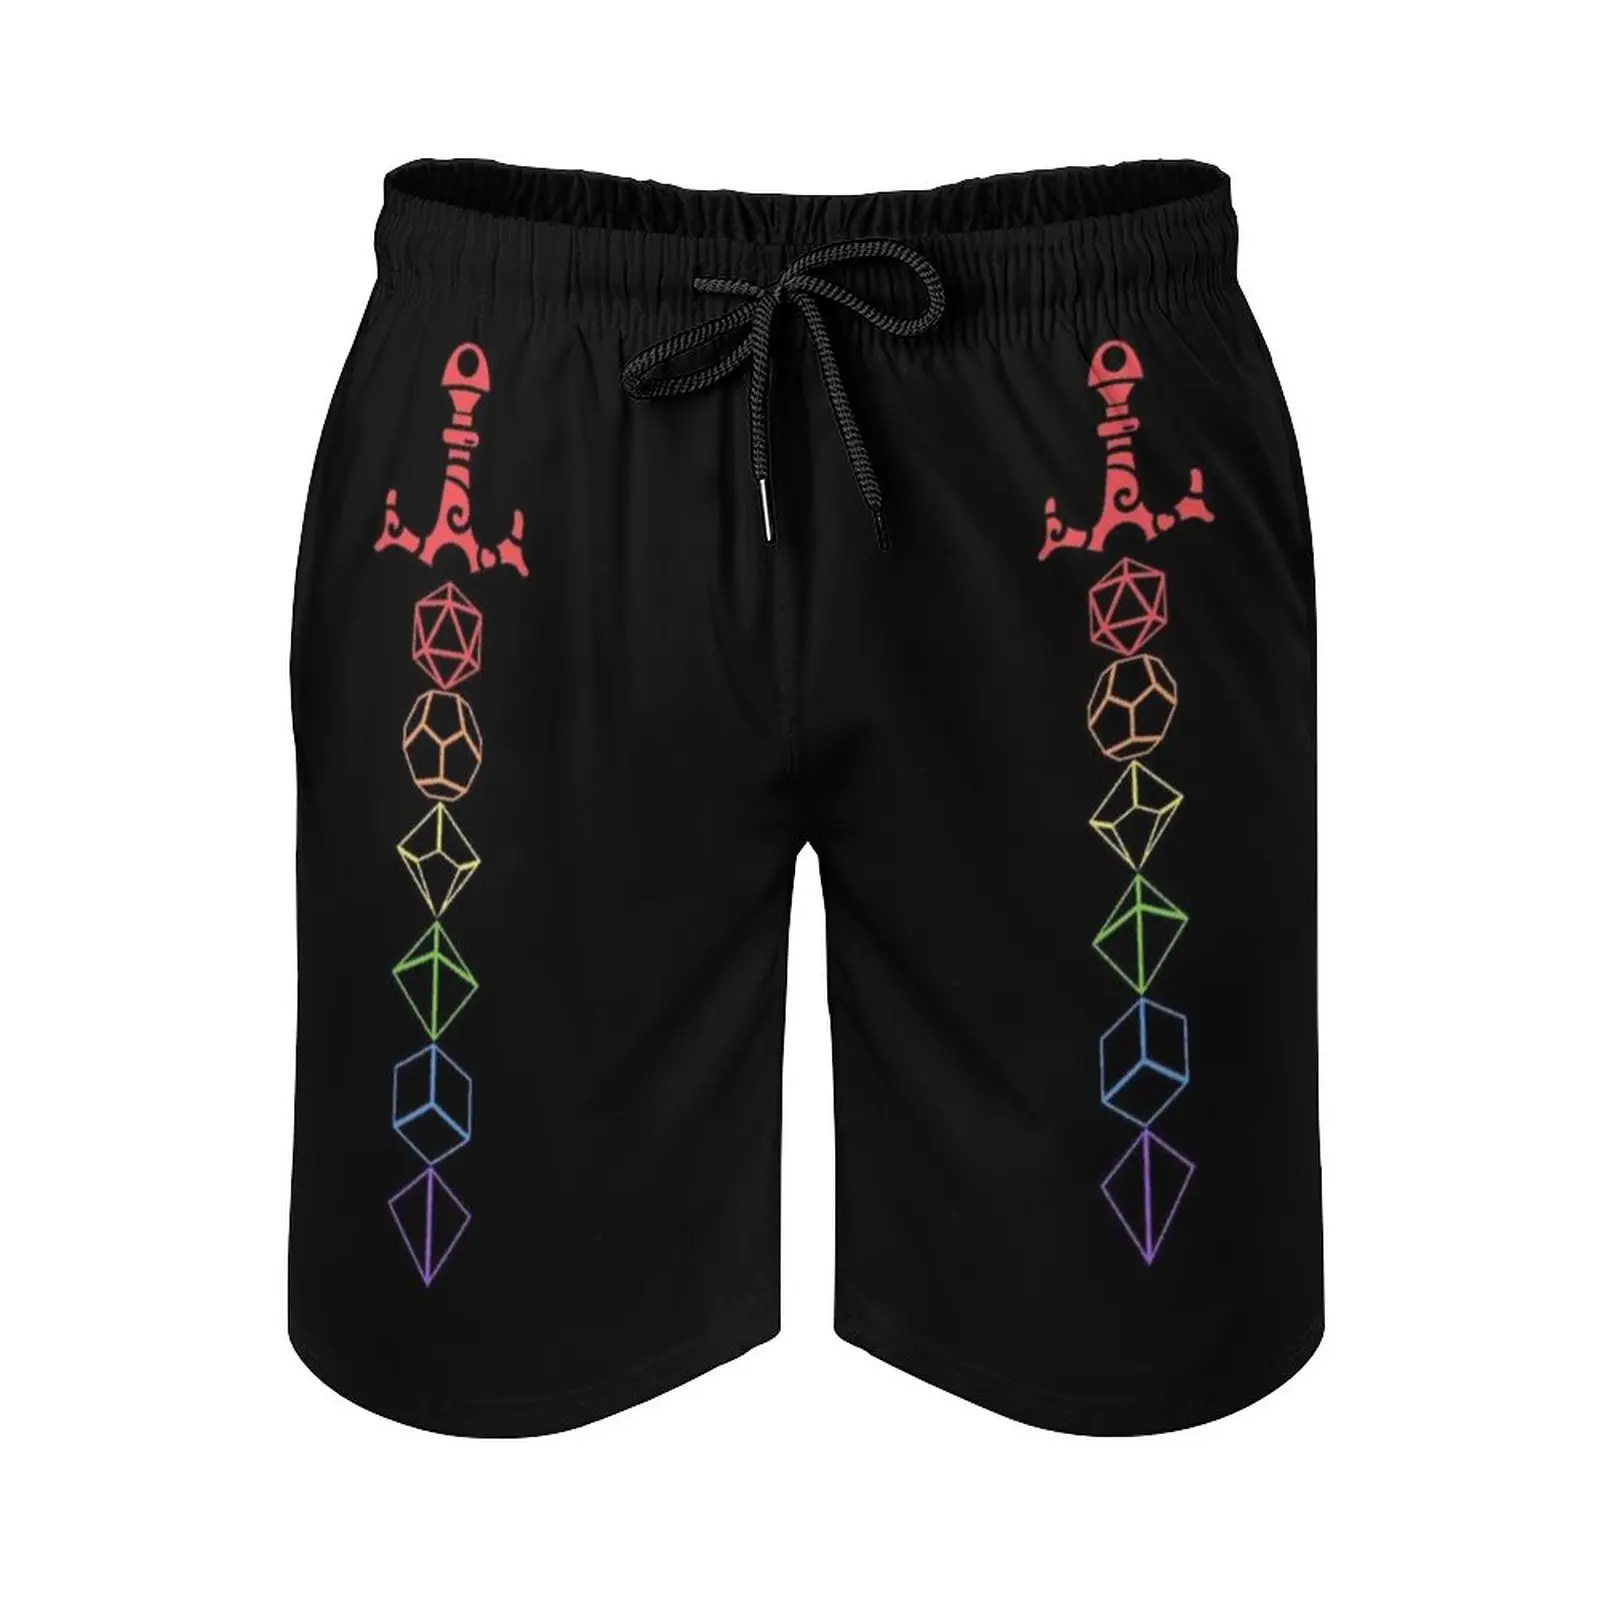 

Rainbow Dice Sword Tabletop Rpg Gaming Men's Sports Short Beach Shorts Surfing Swimming Boxer Trunks S And Dnd D And D Dnd S